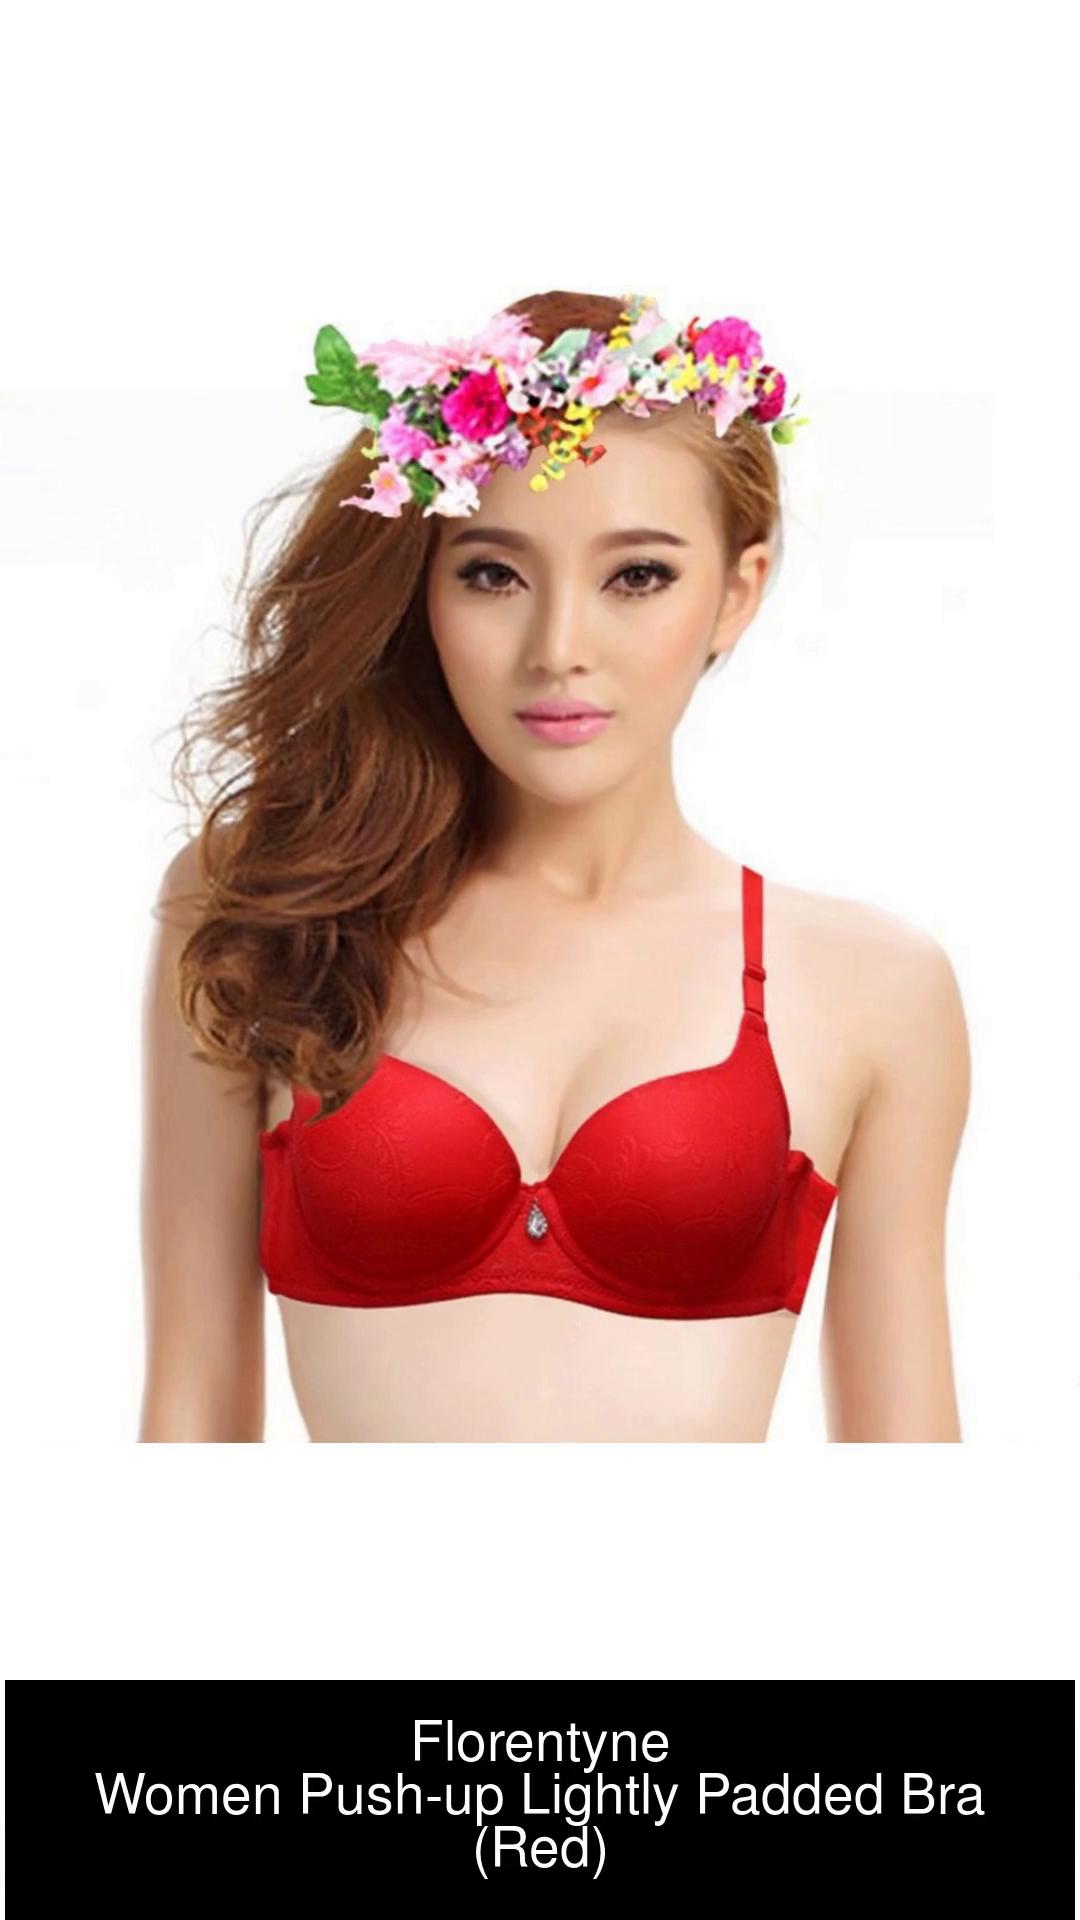 Florentyne Women Push-up Lightly Padded Bra - Buy Red Florentyne Women  Push-up Lightly Padded Bra Online at Best Prices in India